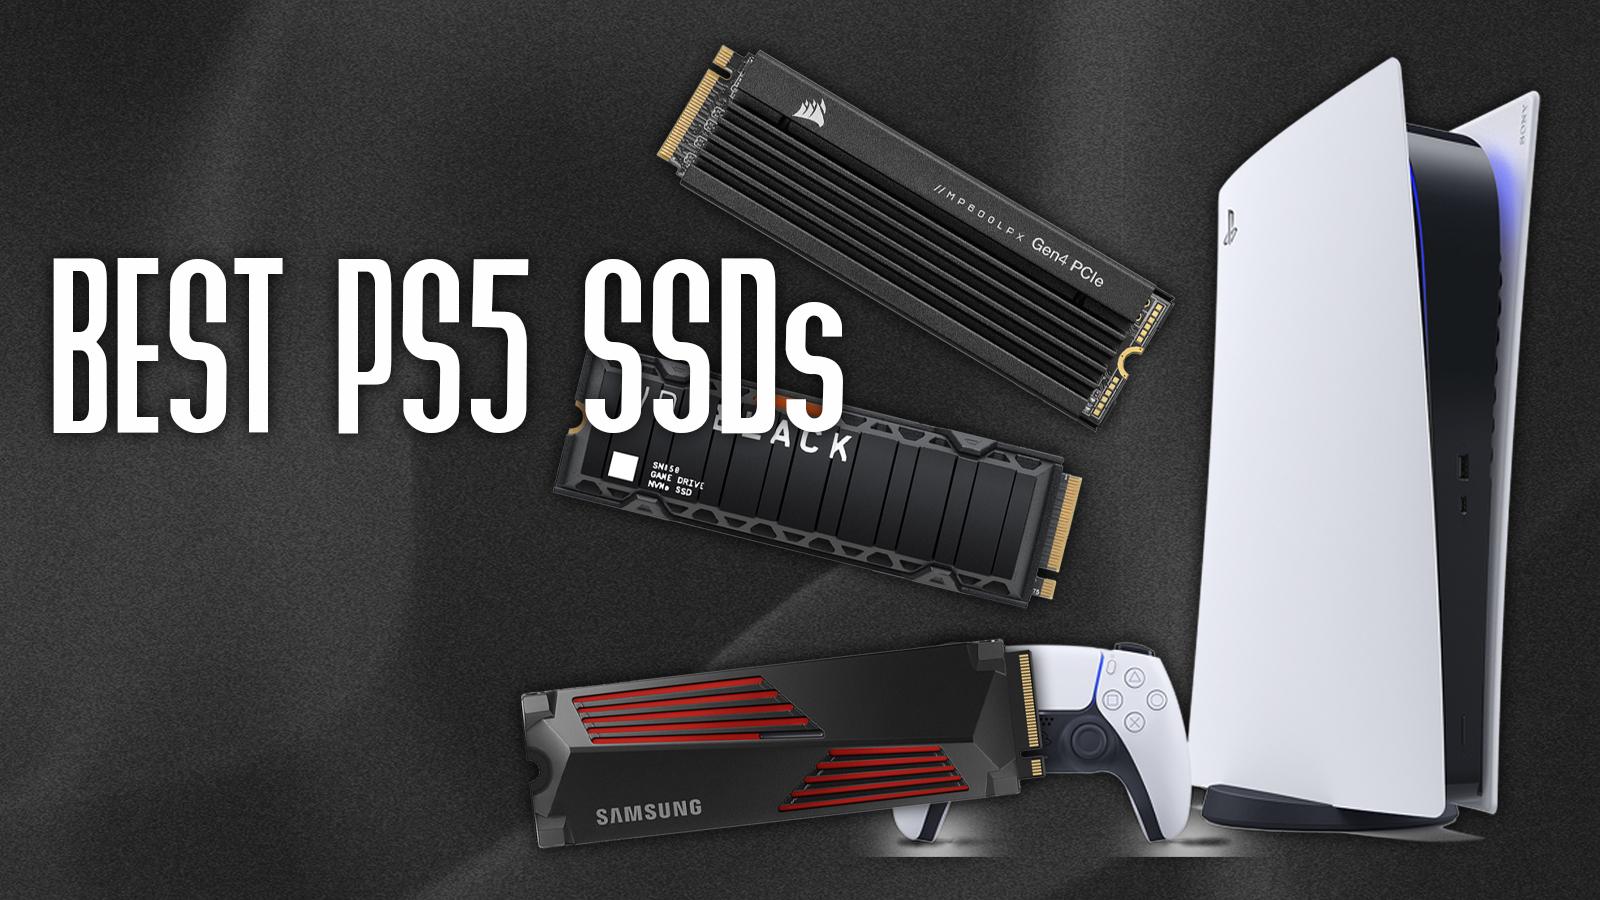 BEST PS5 SSDs